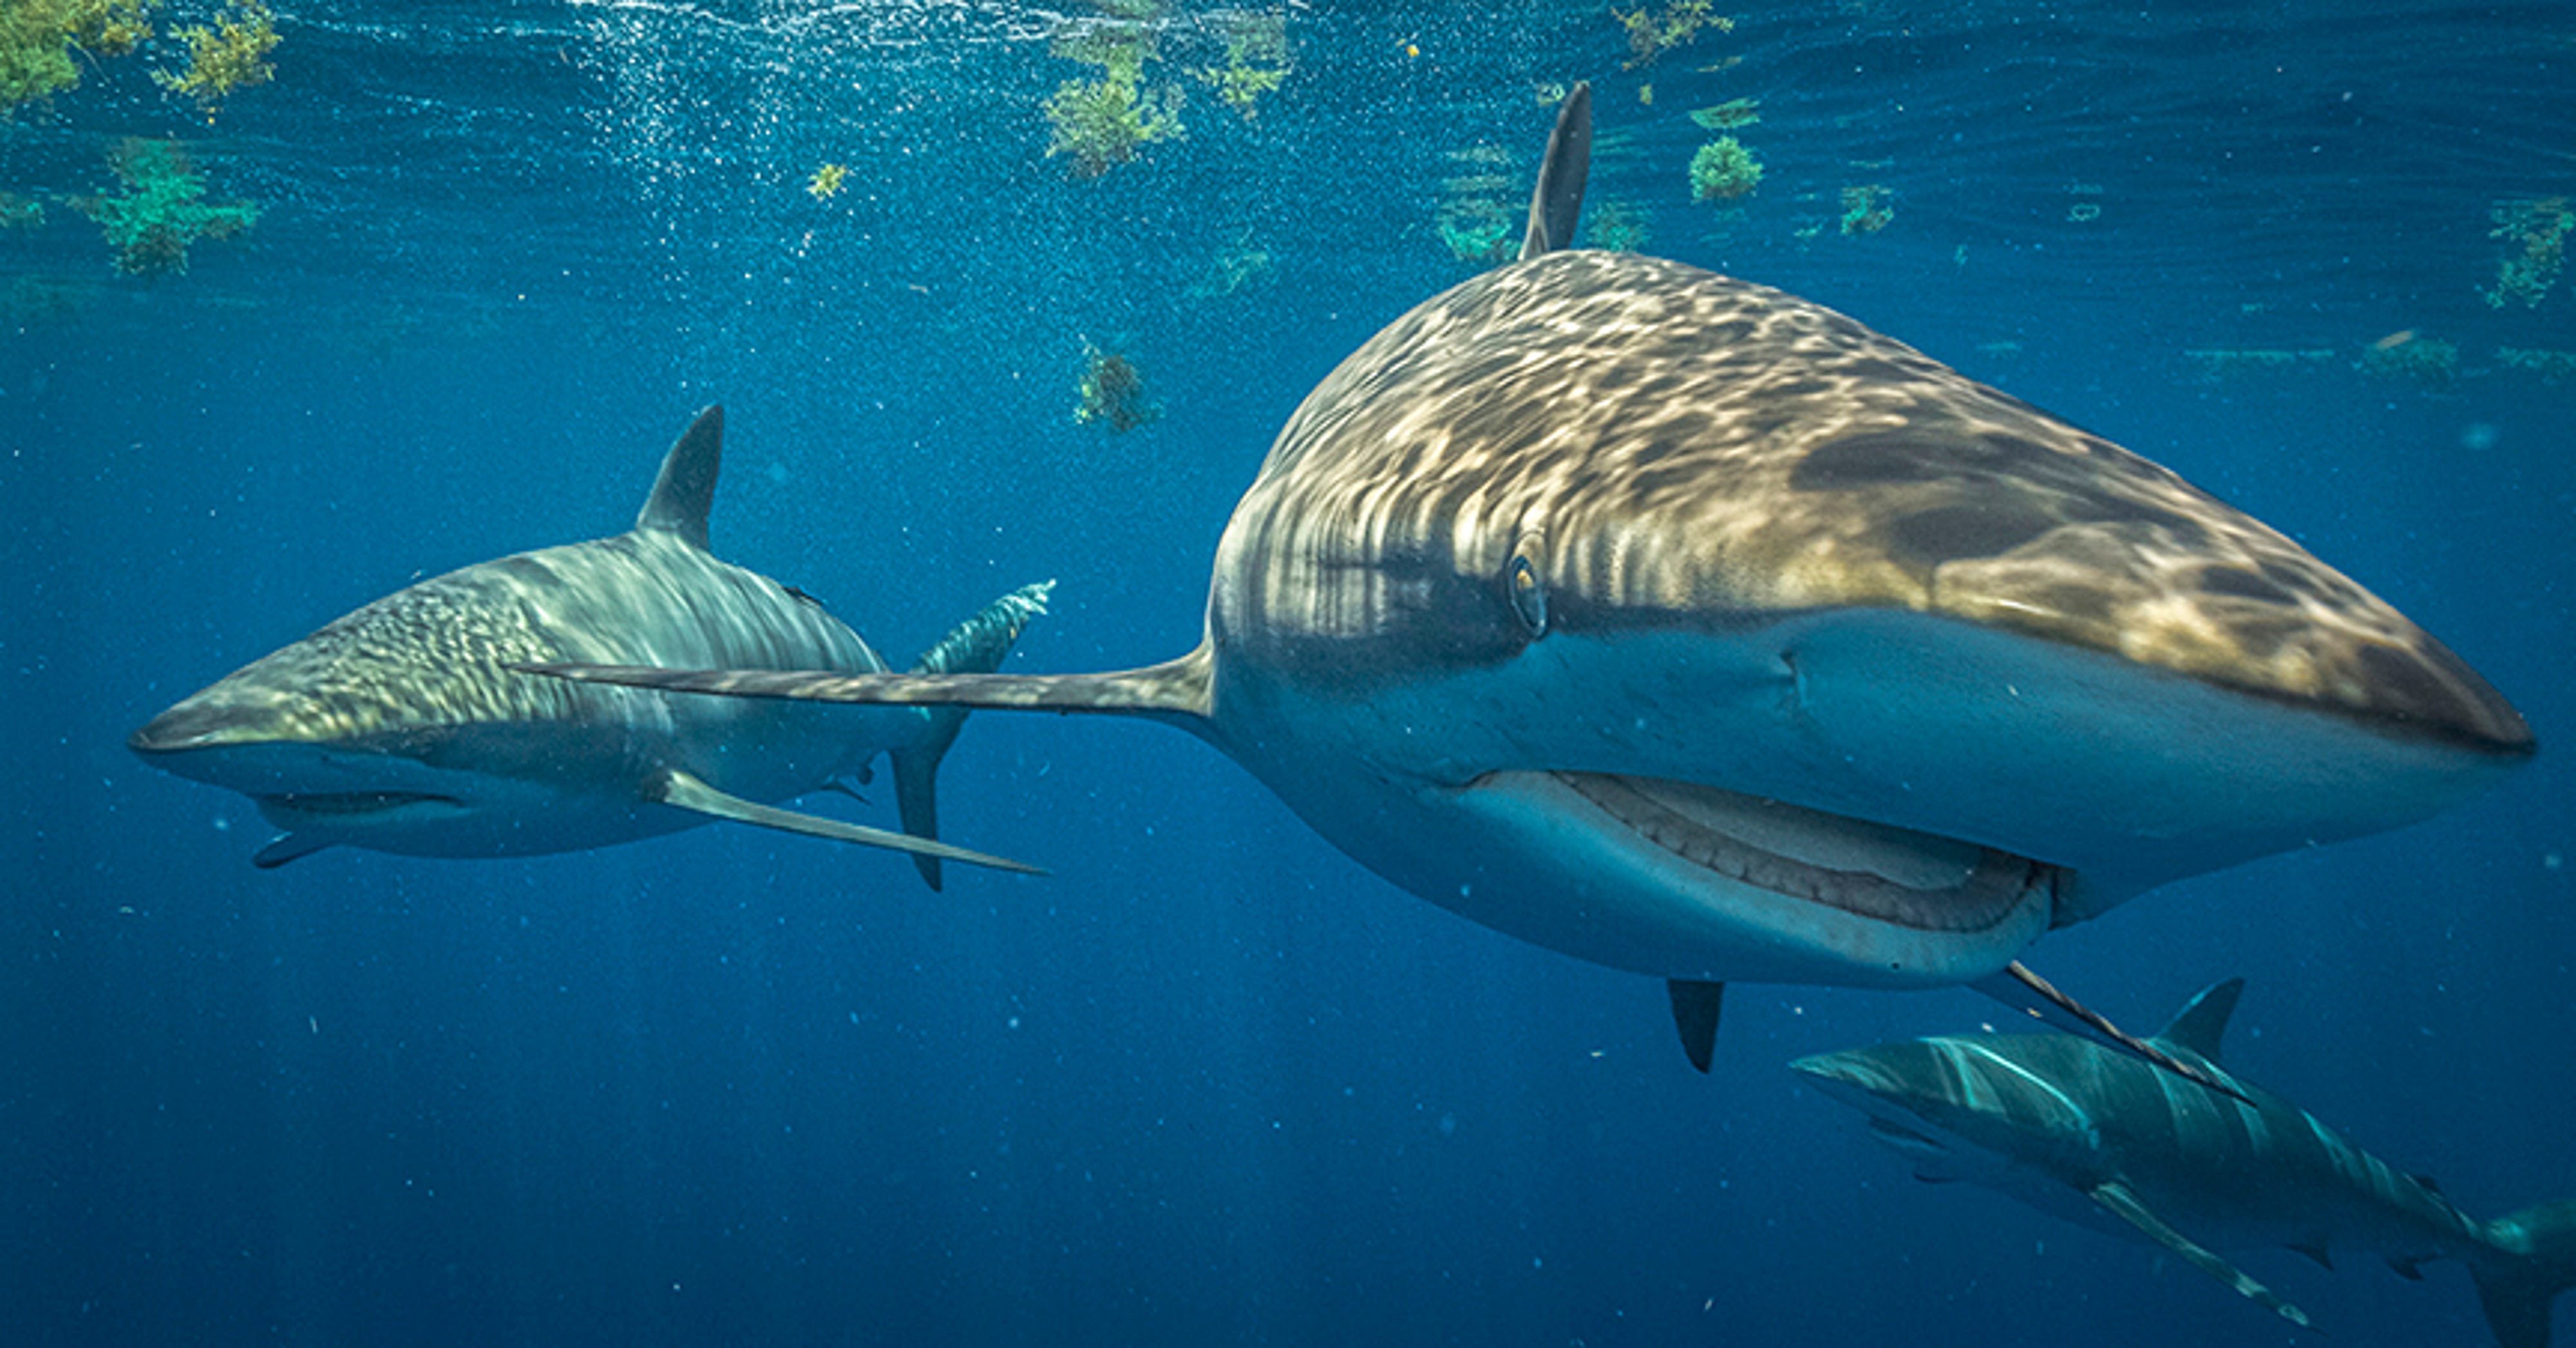 Sharks swimming closer to shore, which threatens humans — and sharks